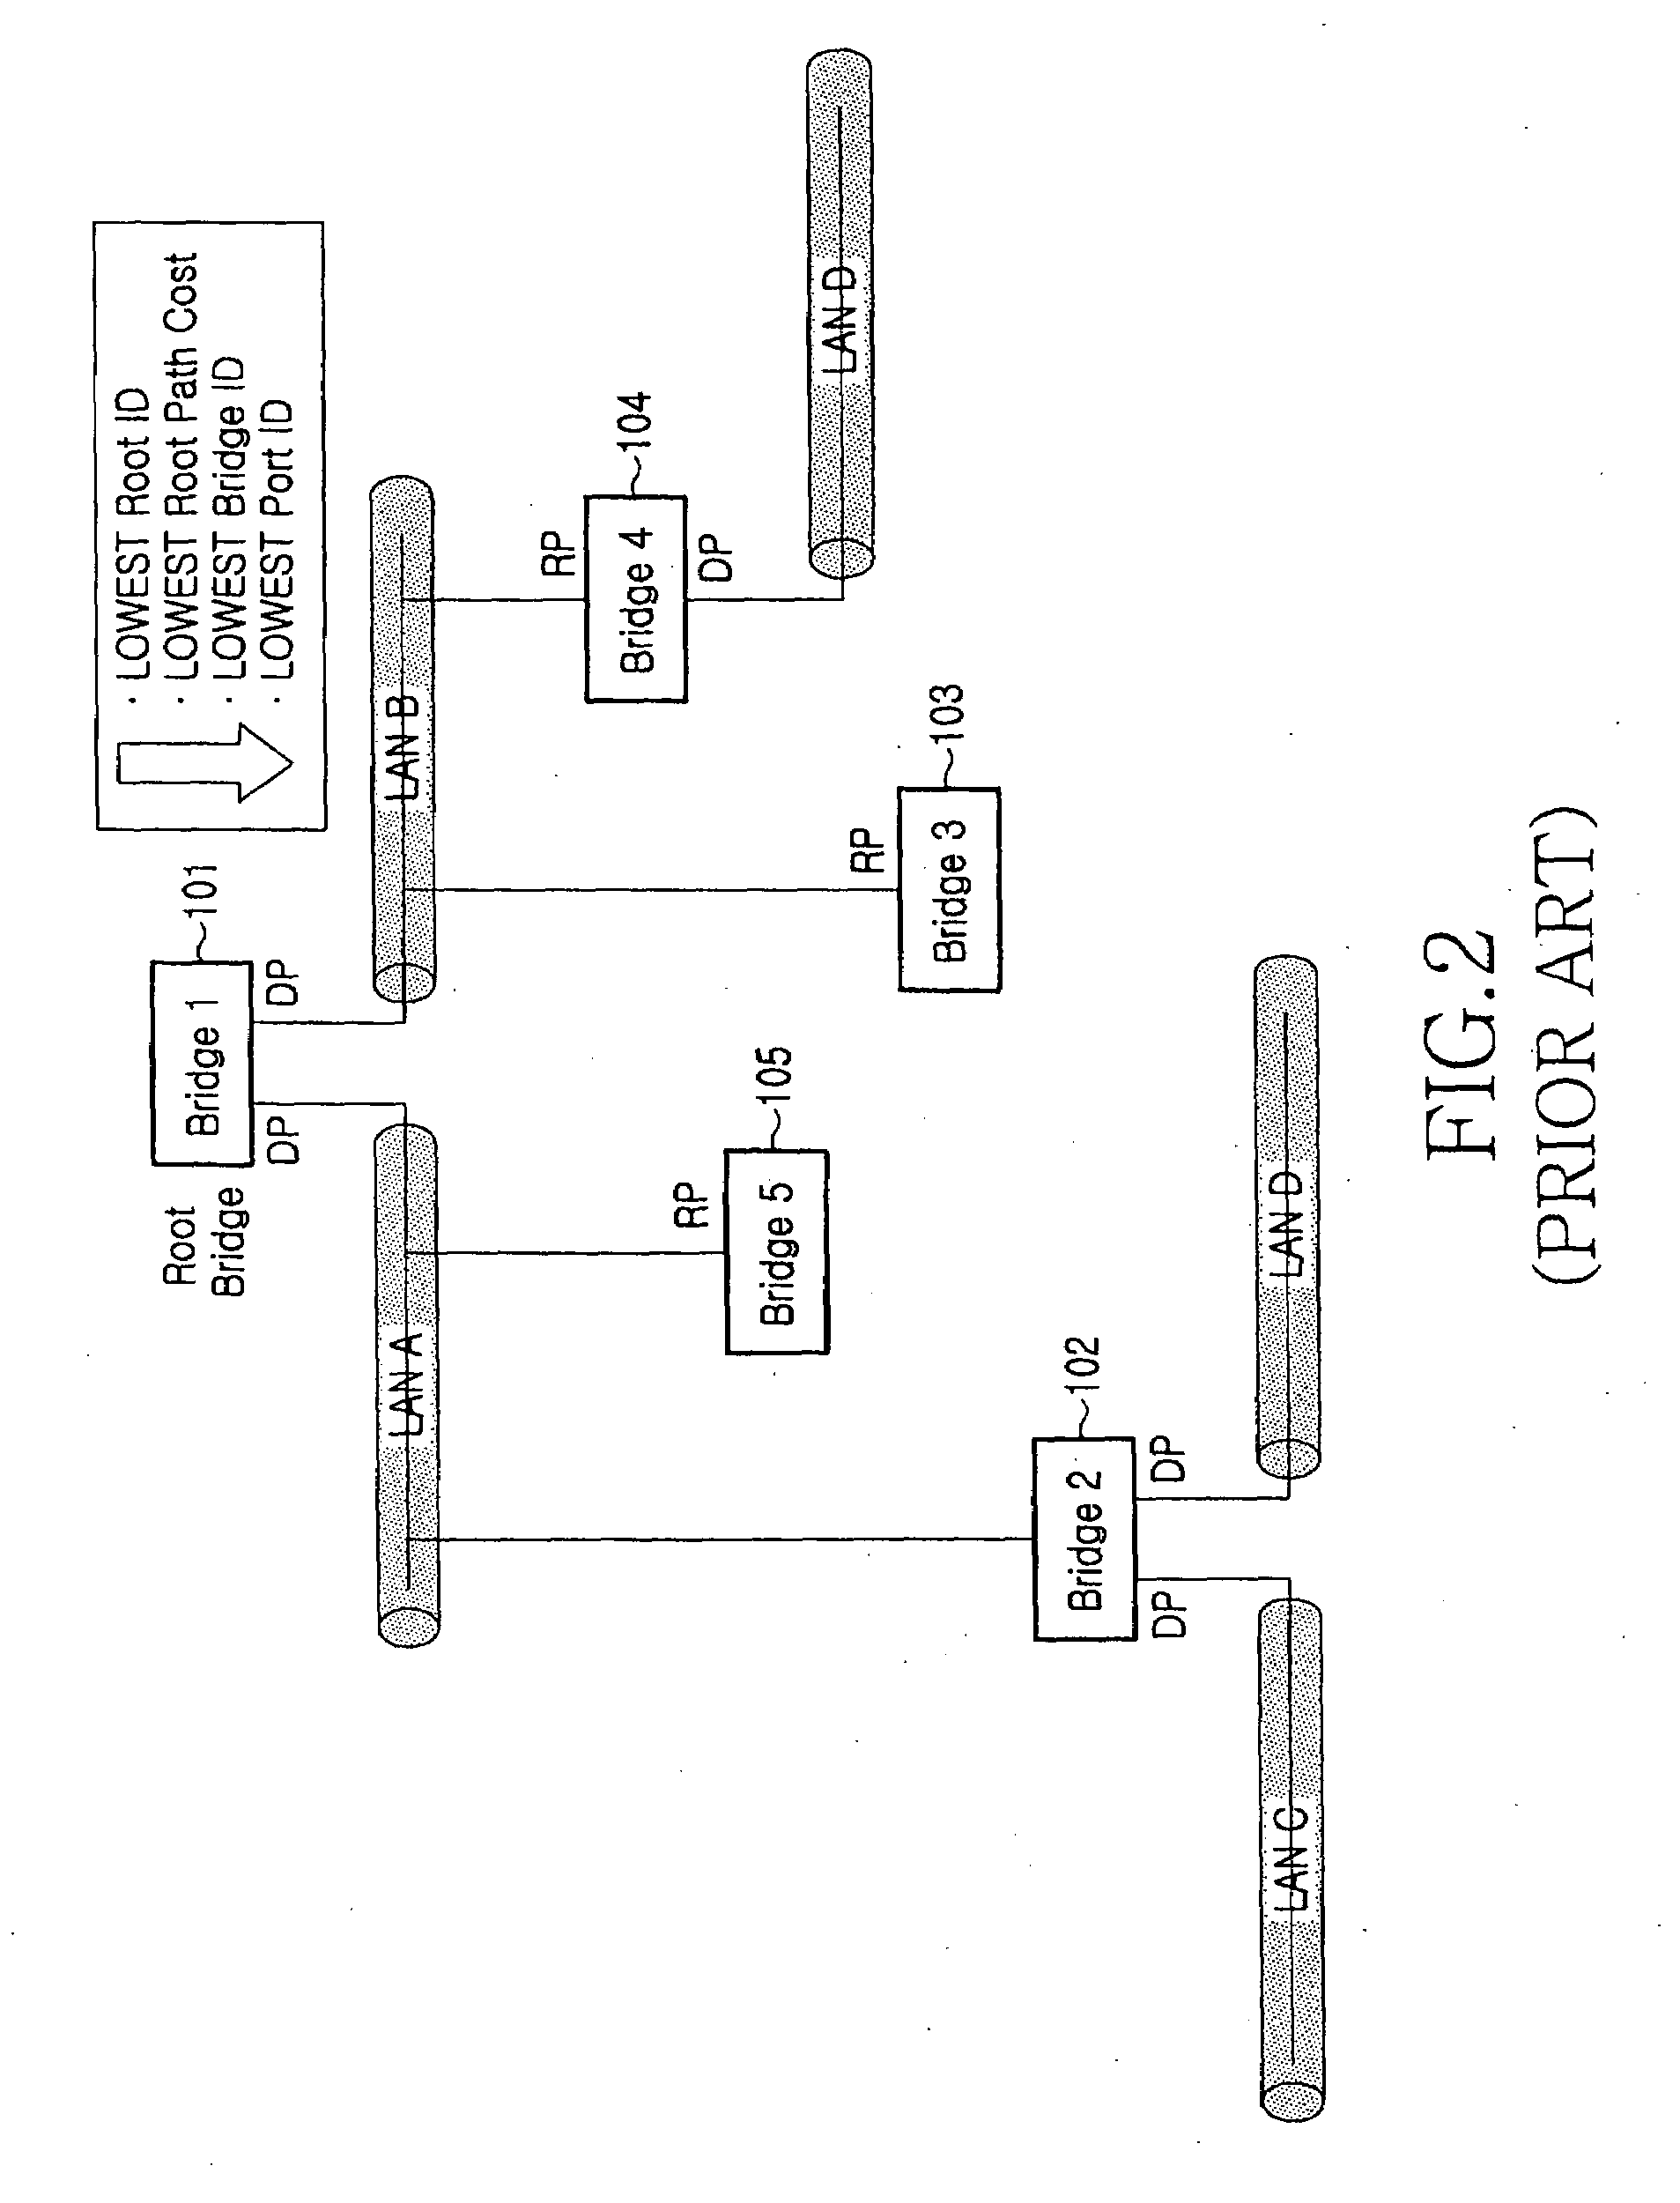 Method for selecting root bridge in configuration of spanning tree